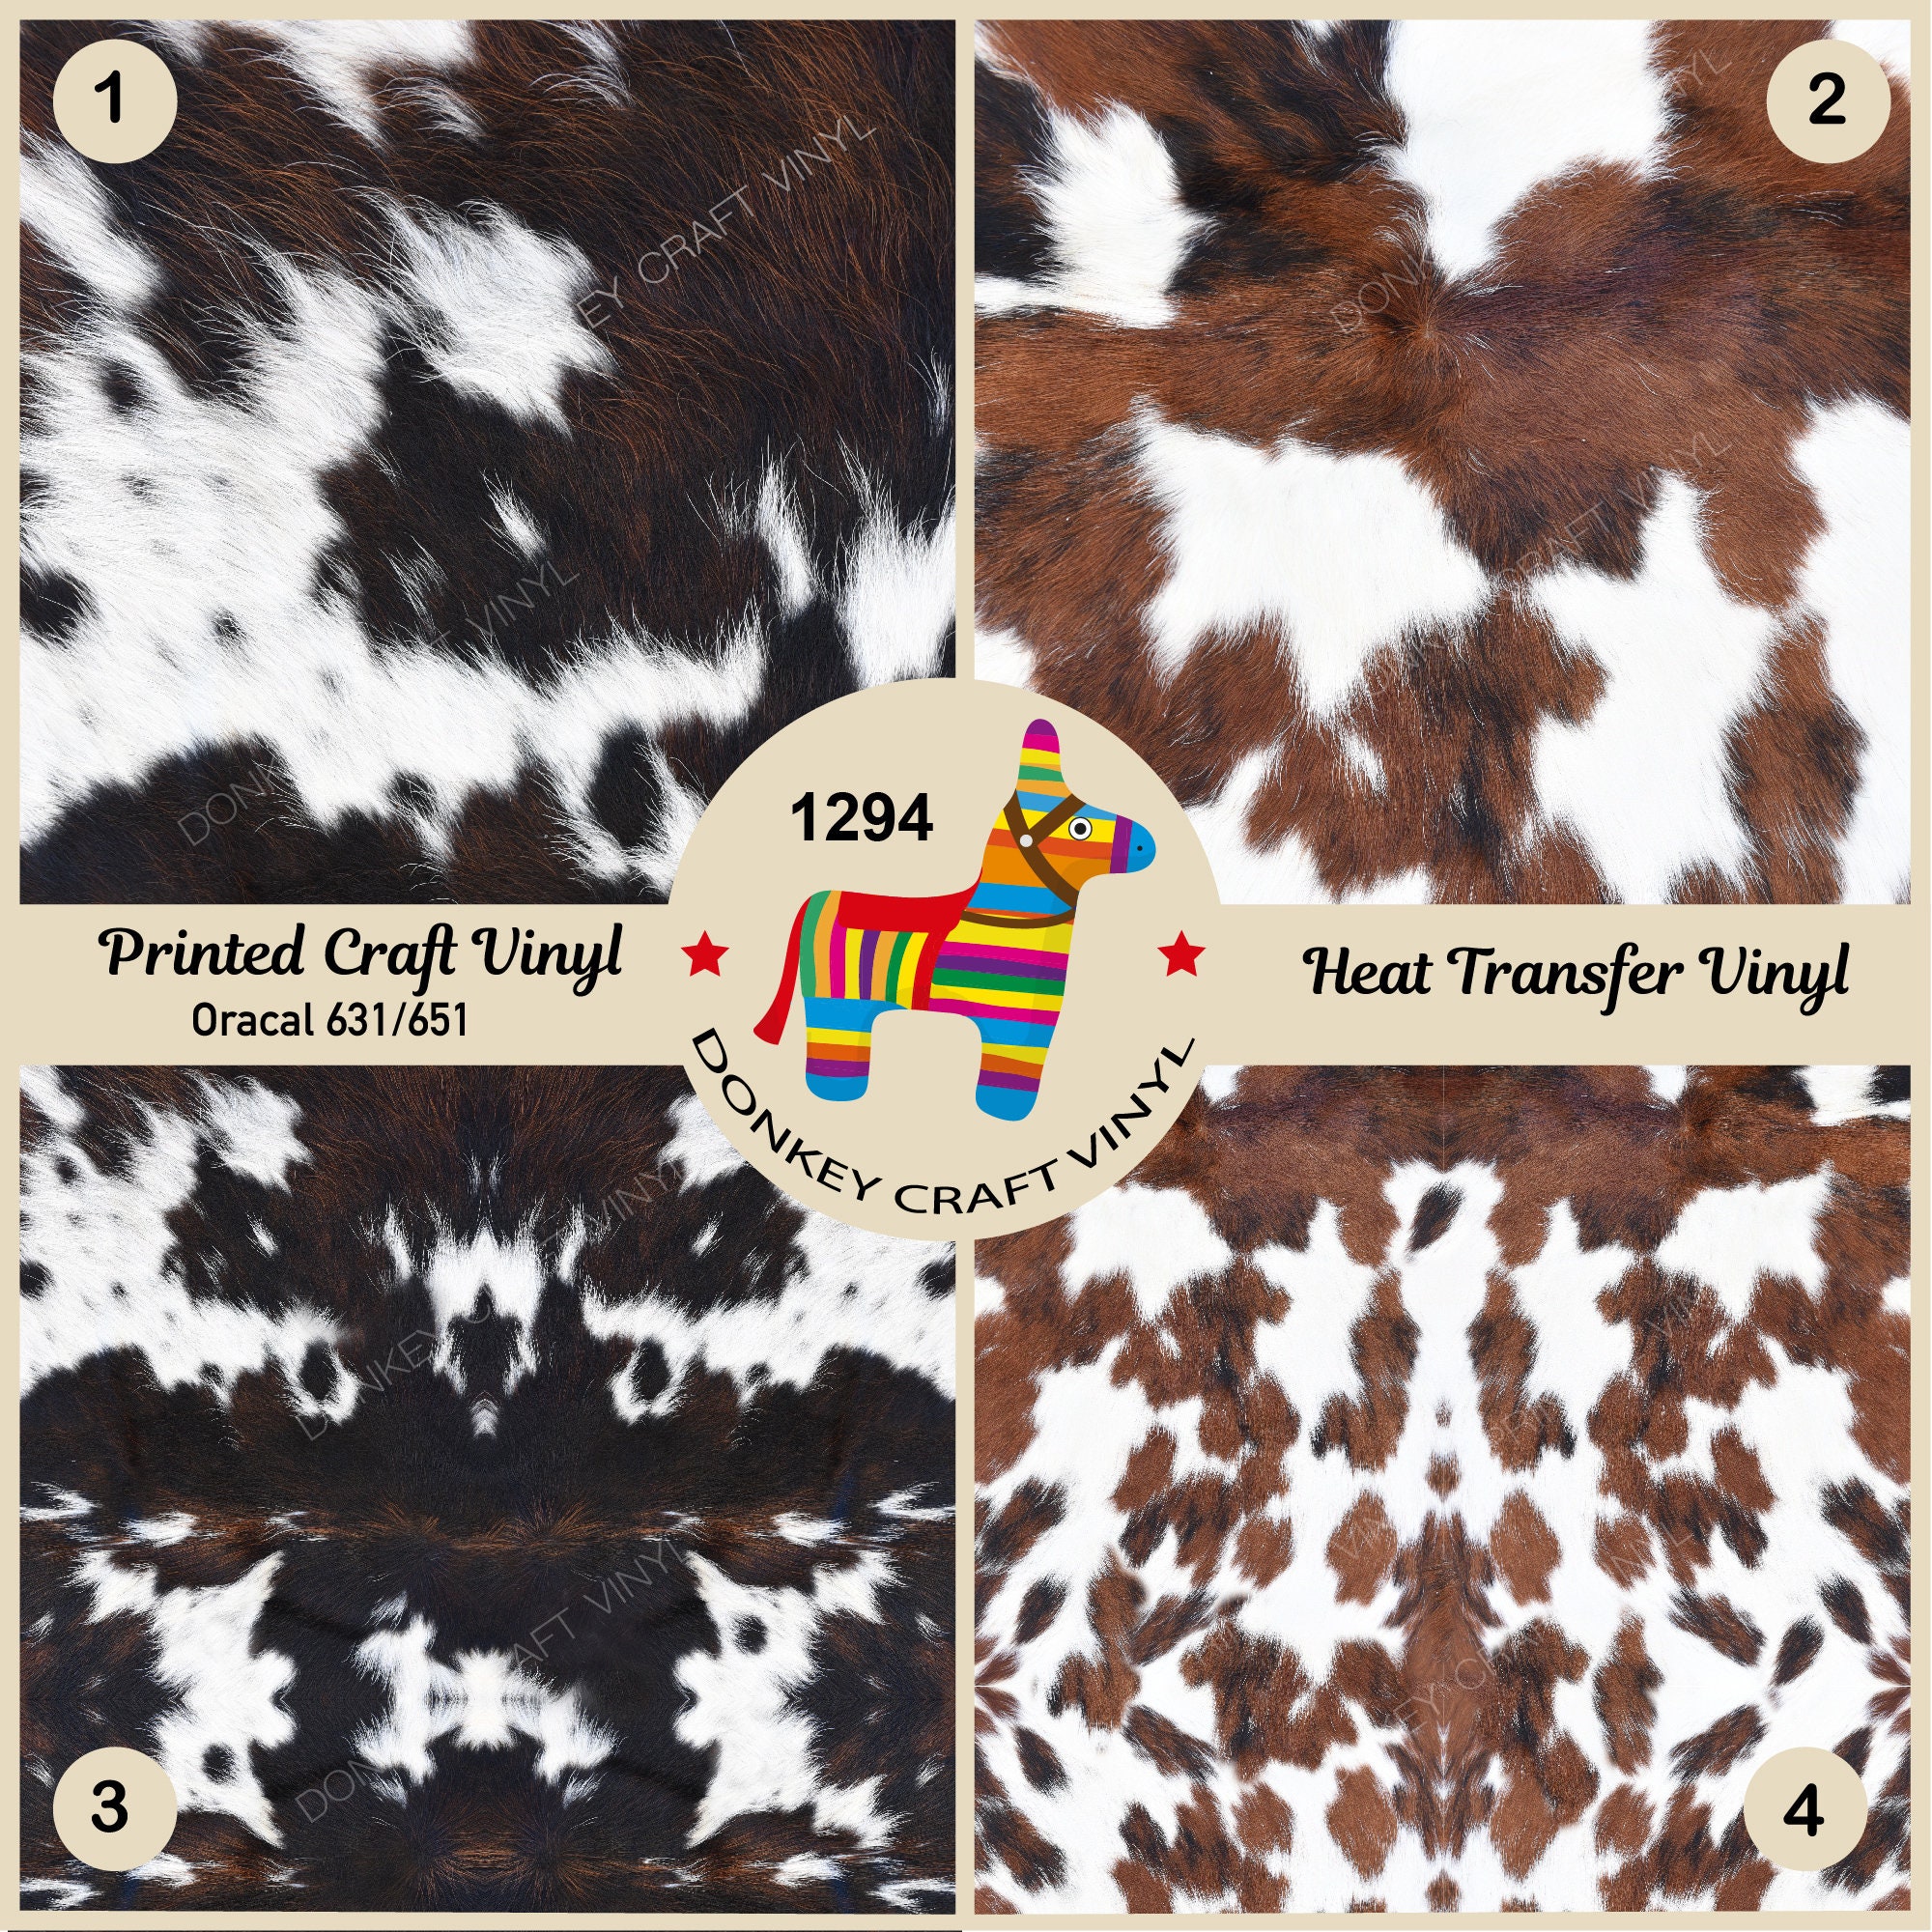 Highland Cow Farm Patterned Vinyl – TheVinylPeople